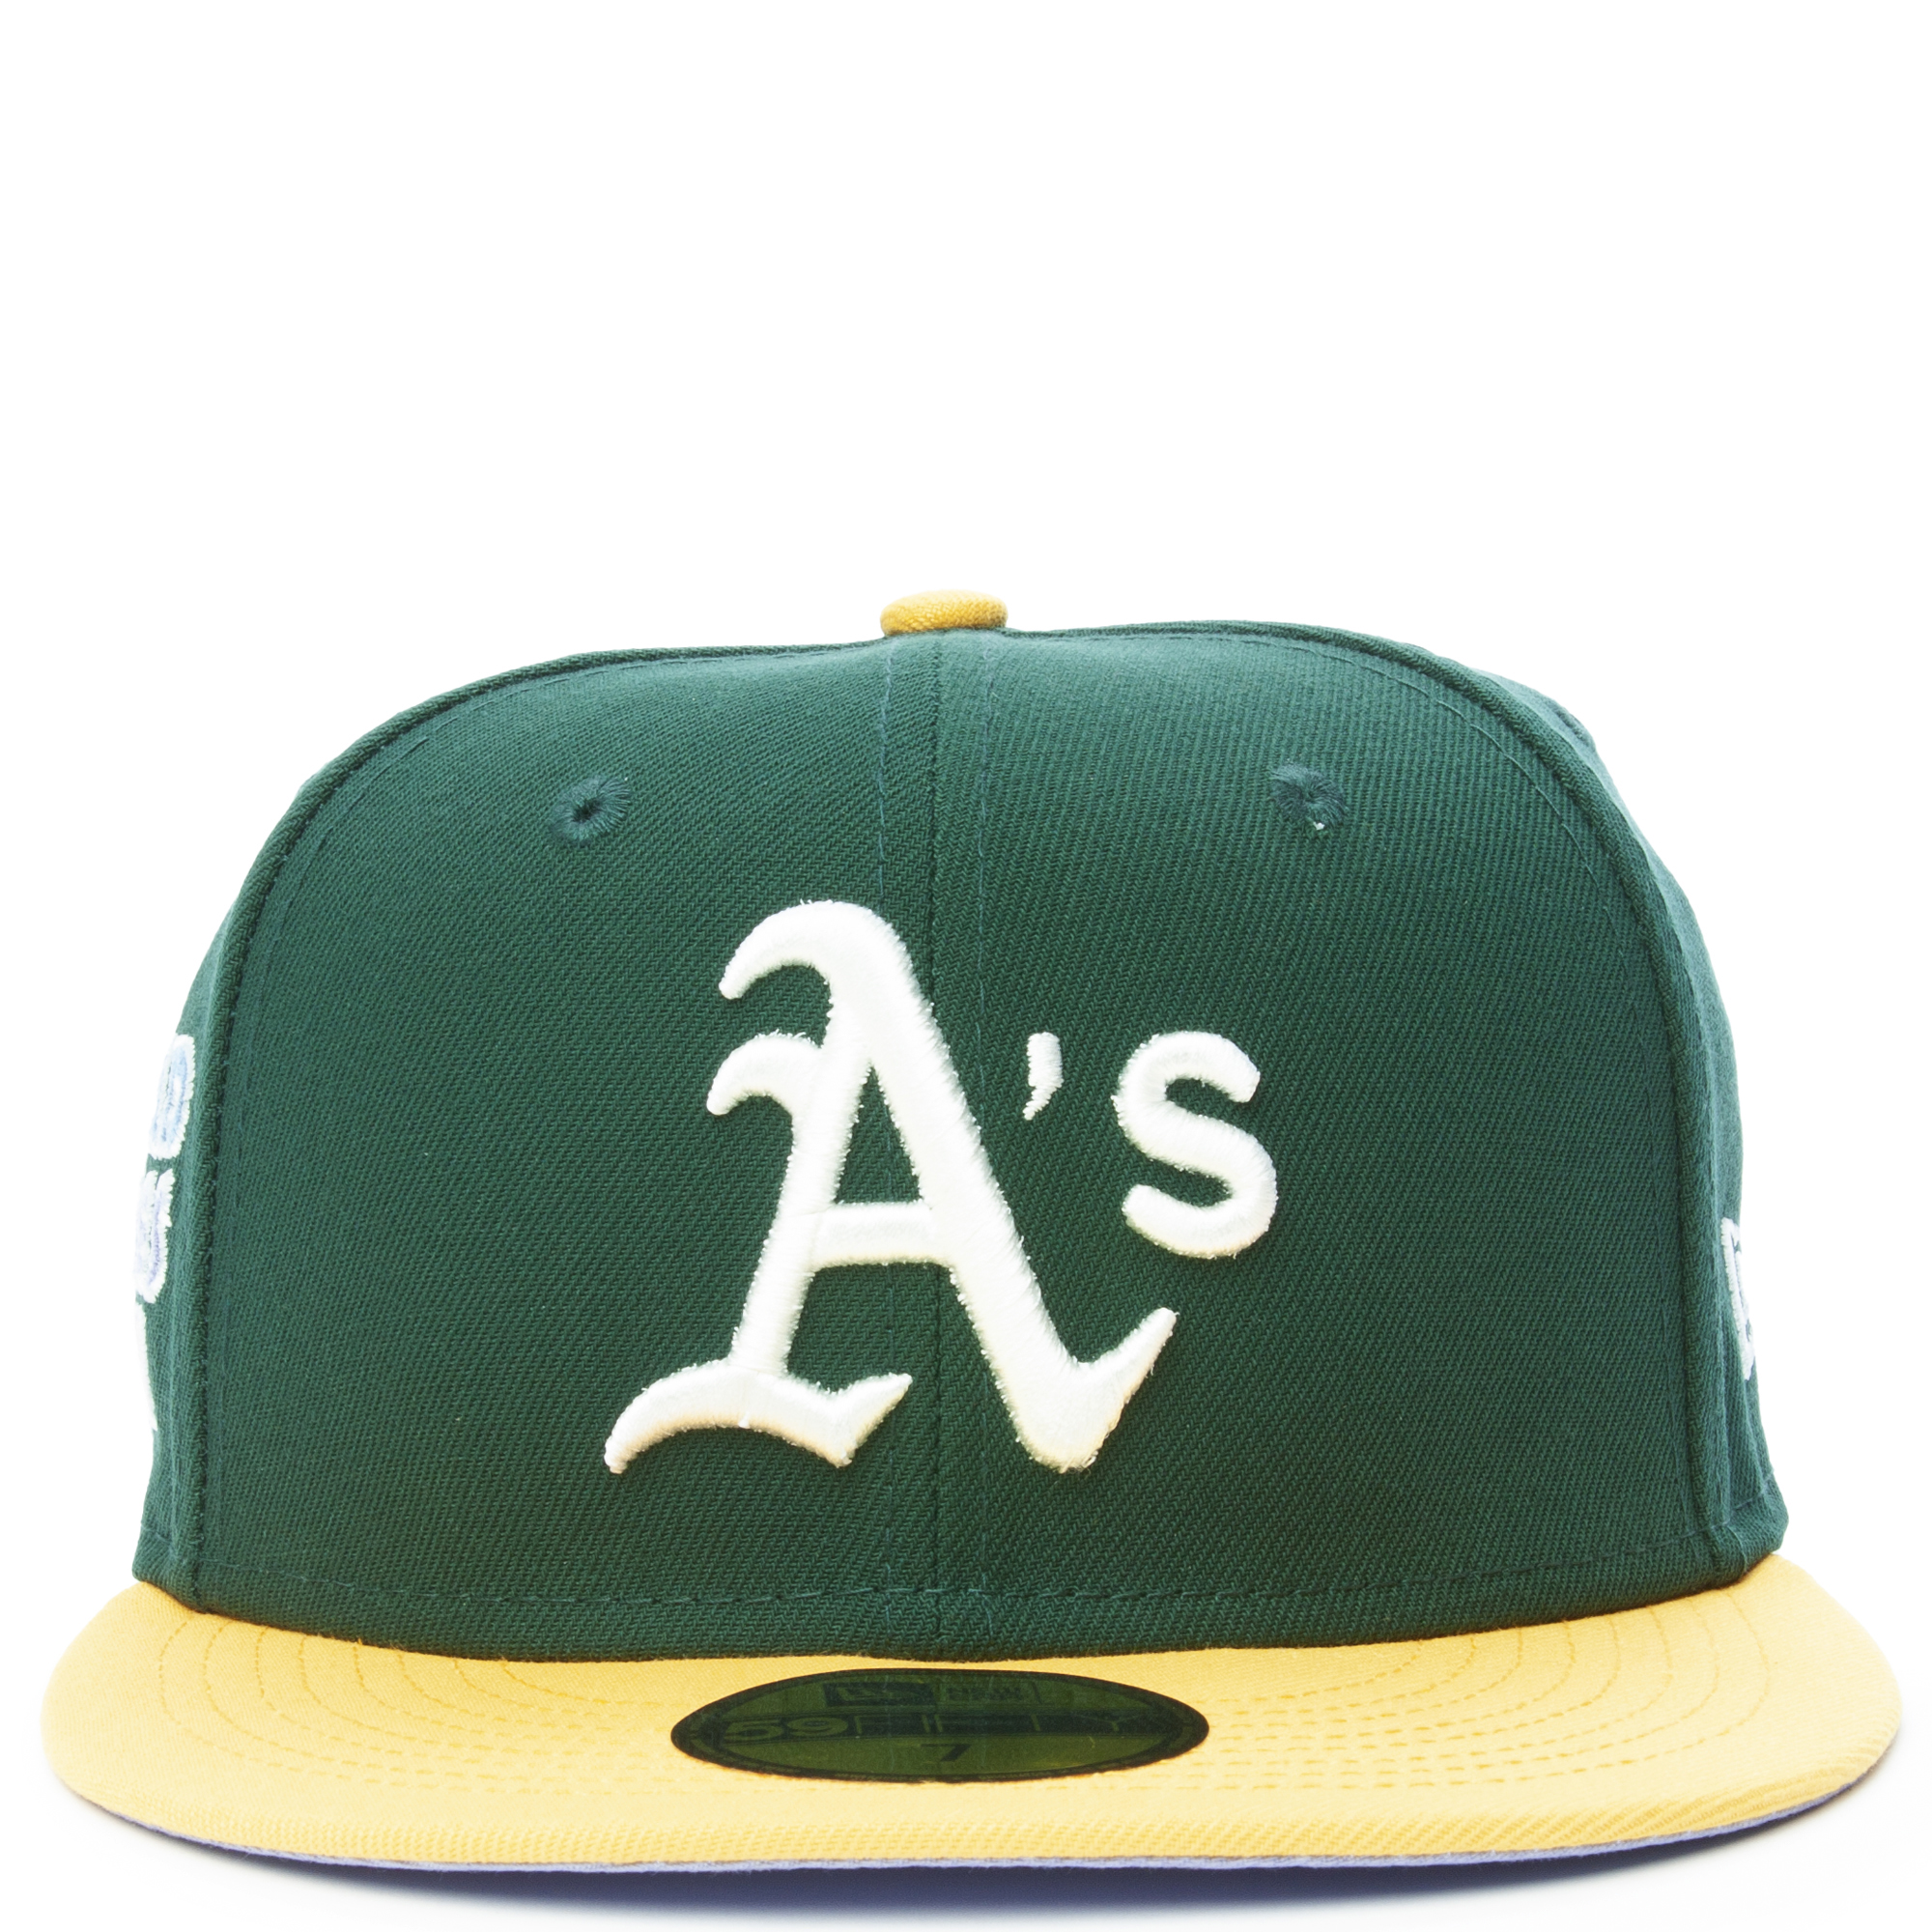 MLB New Era Oakland A's Athletics Fitted Hat Green 7 1/8 1/4